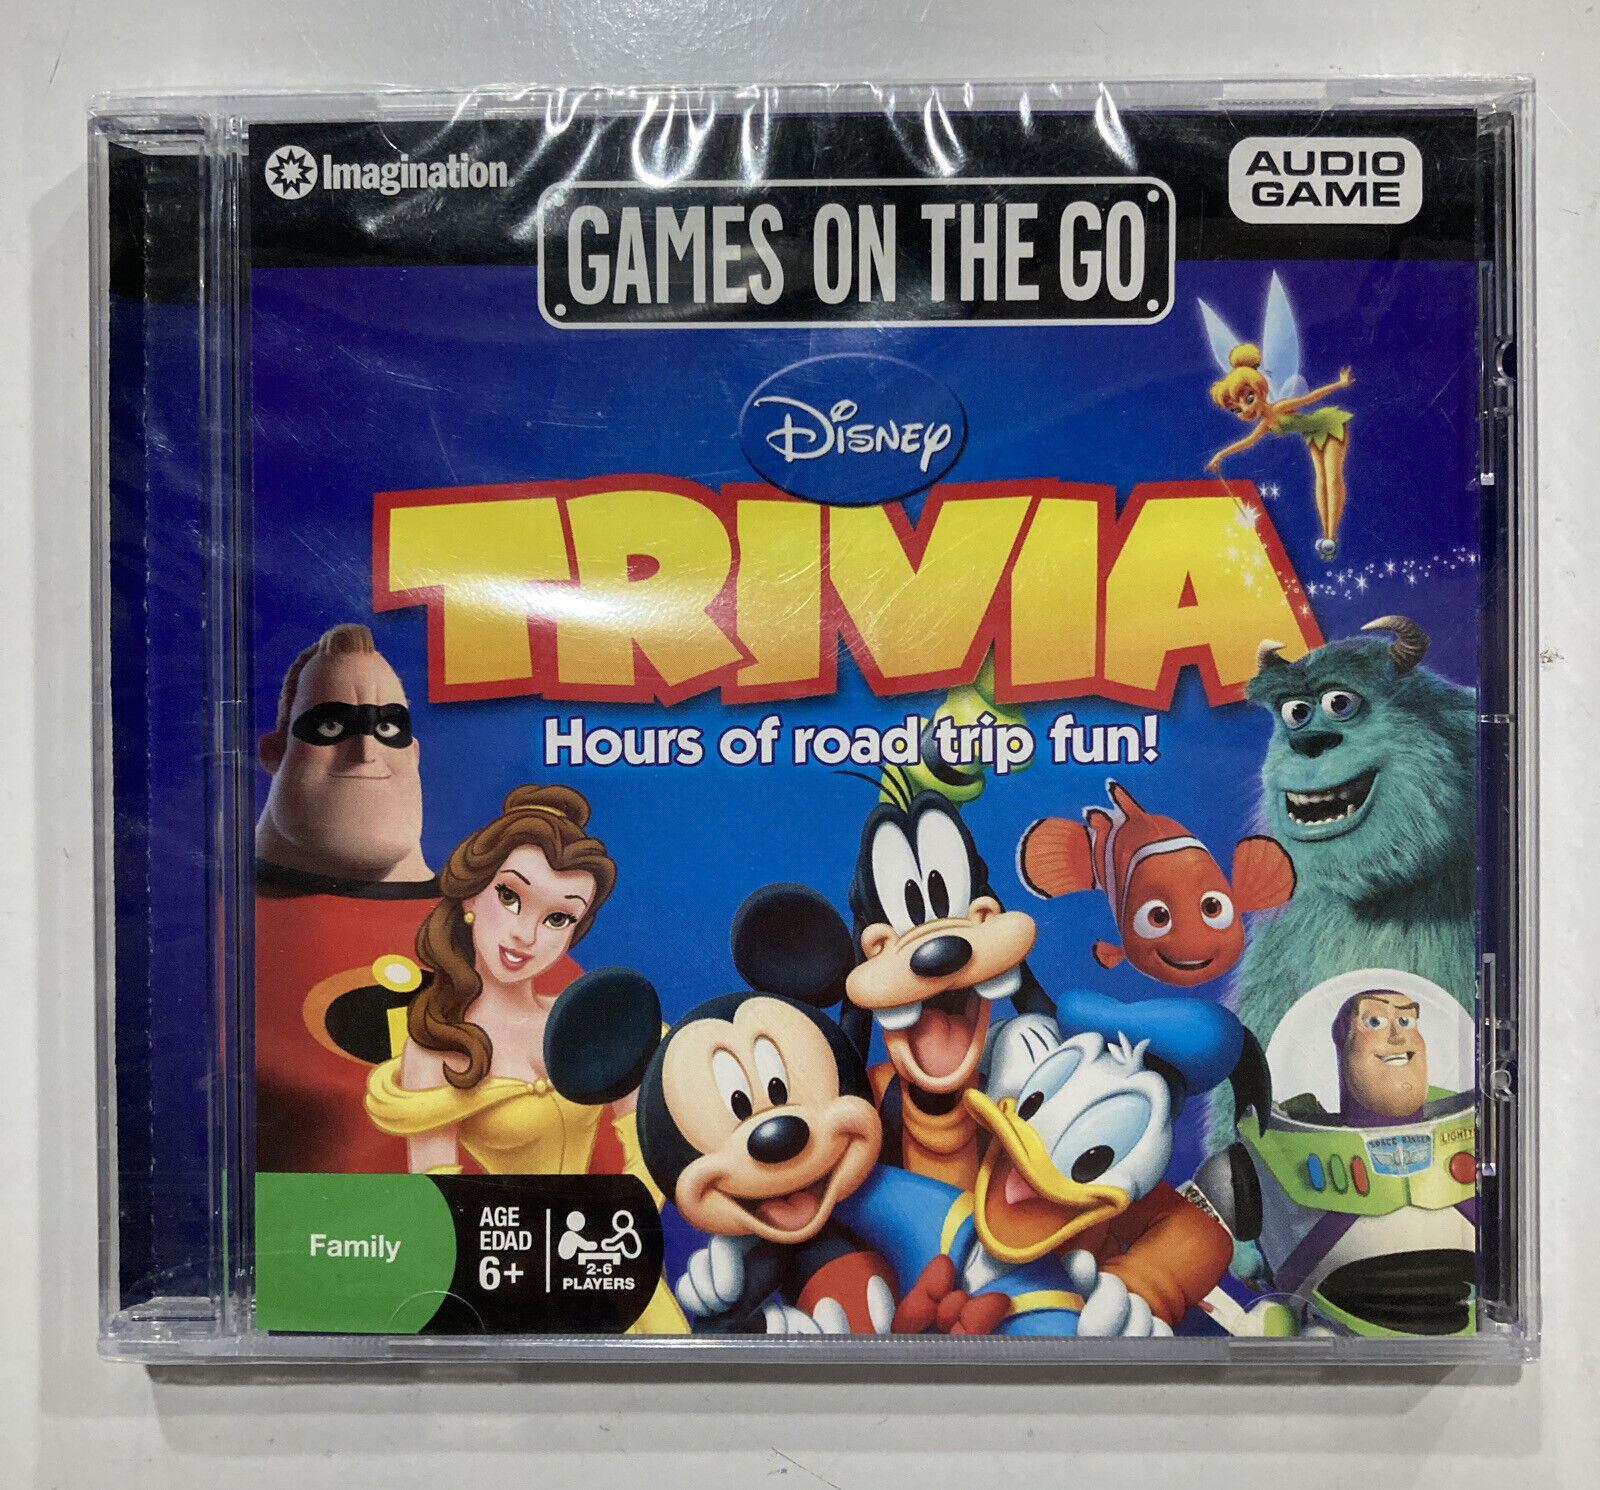 Disney Games On The Go Trivia Game - Hours Of Road Trip Fun - Audio Game